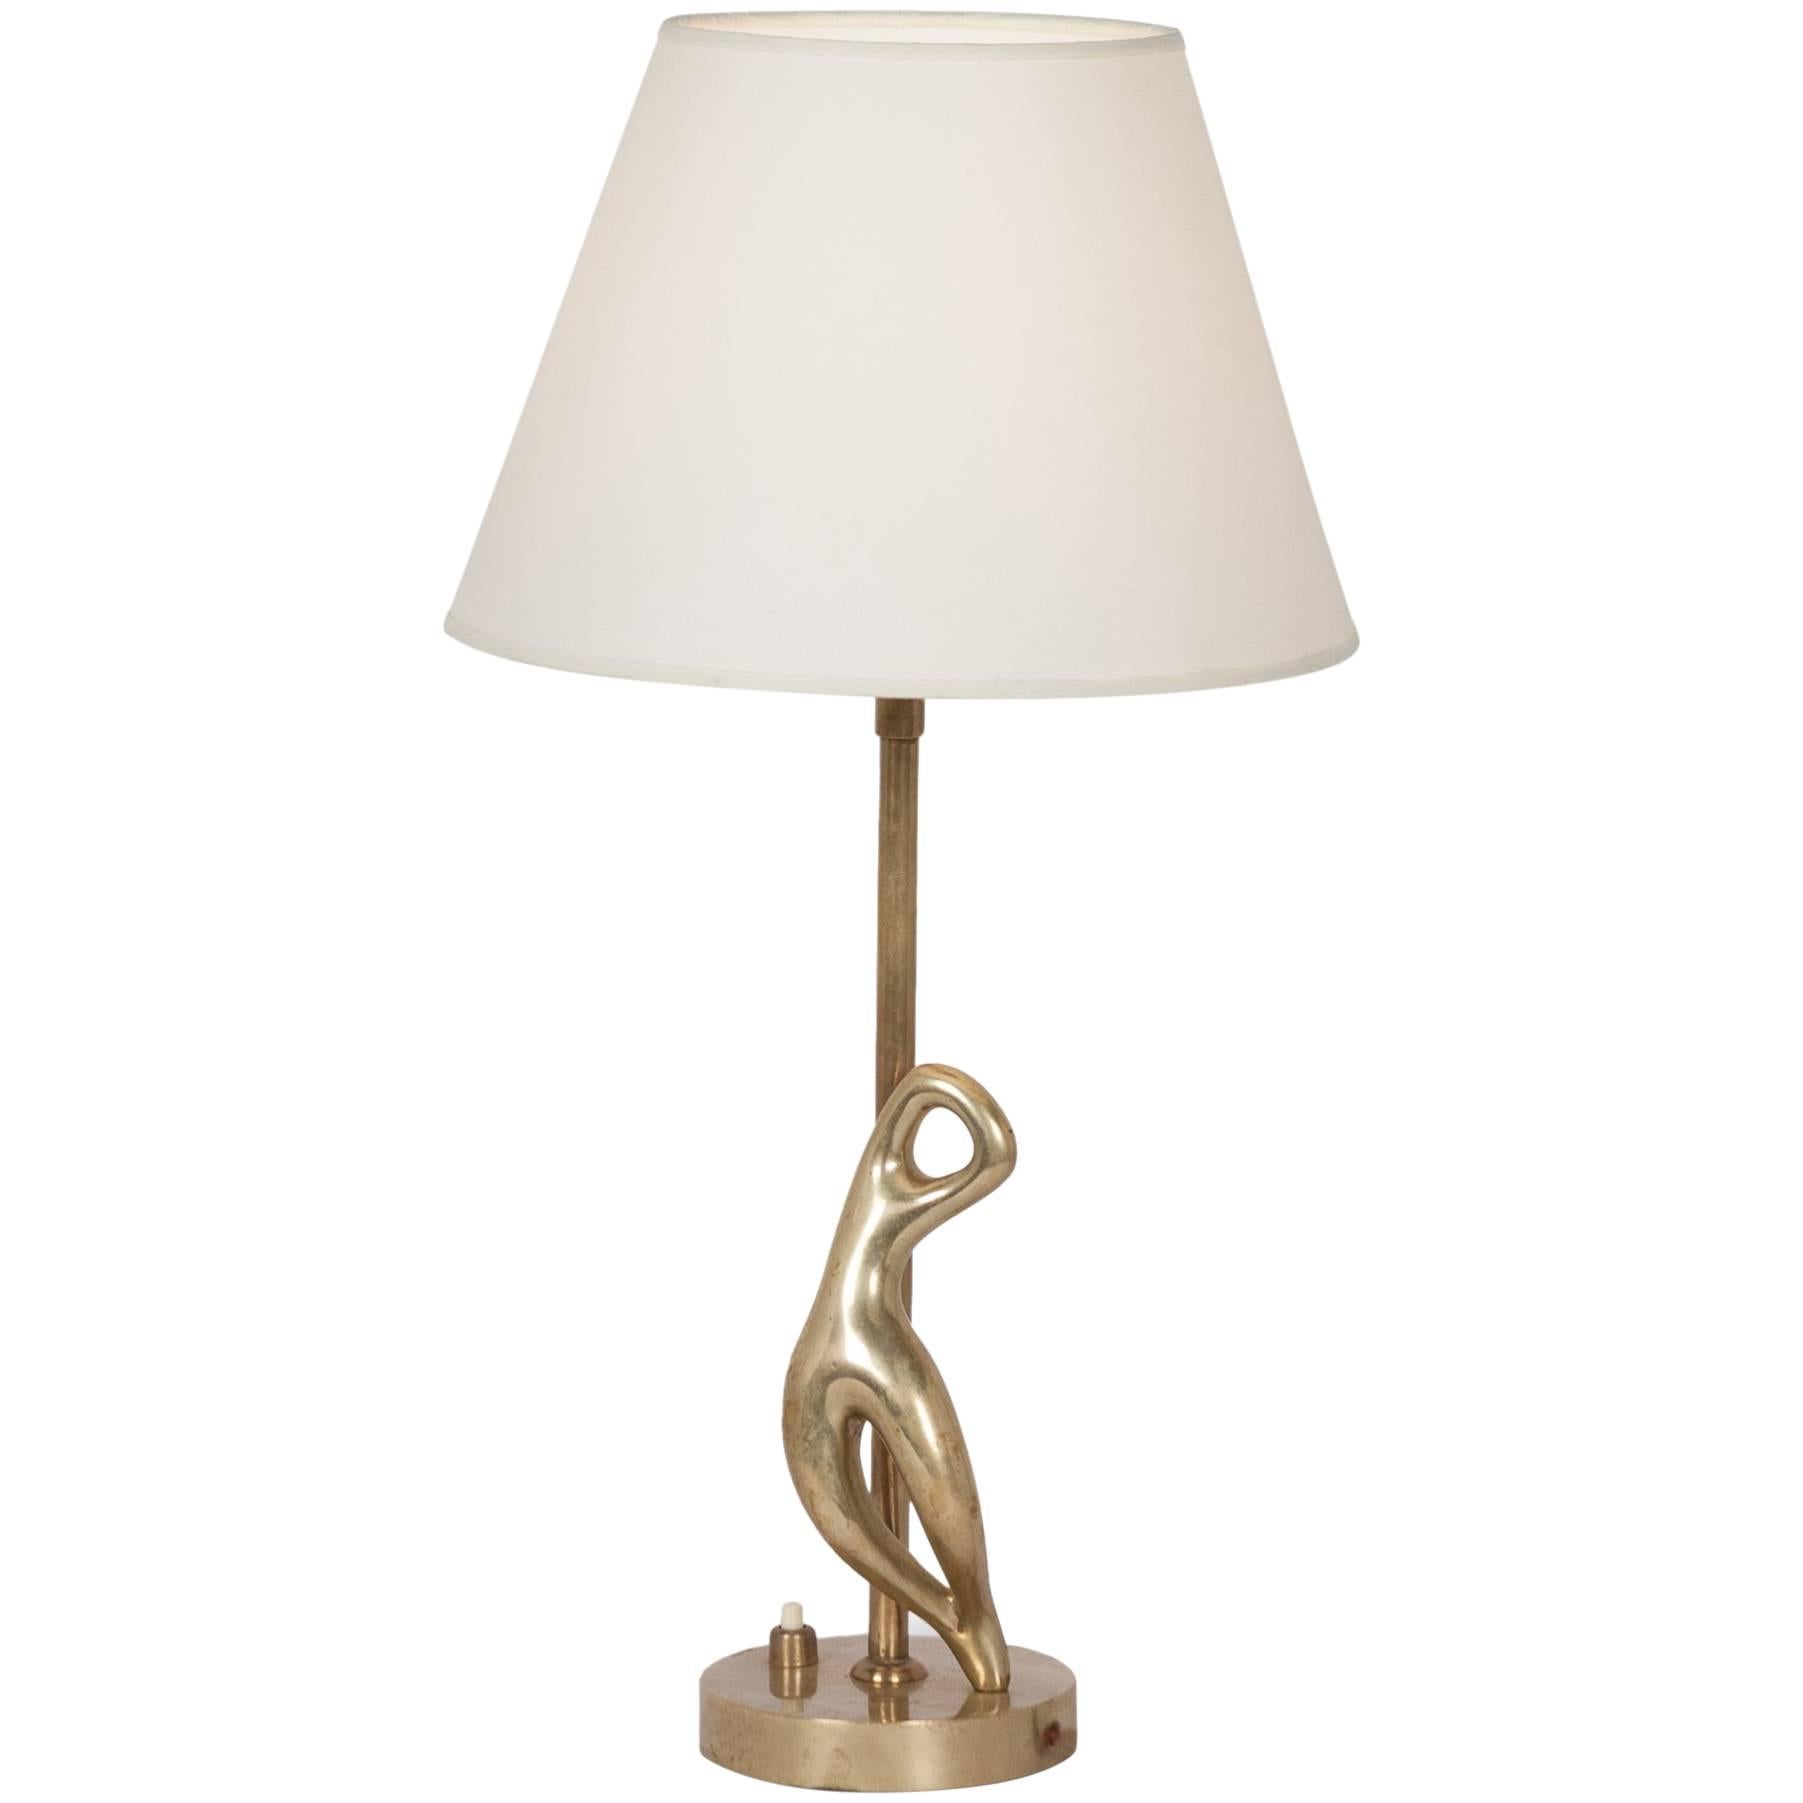 Abstract Bronze Figure Table Lamp, 1950s, by Ricardo Scarpa For Sale